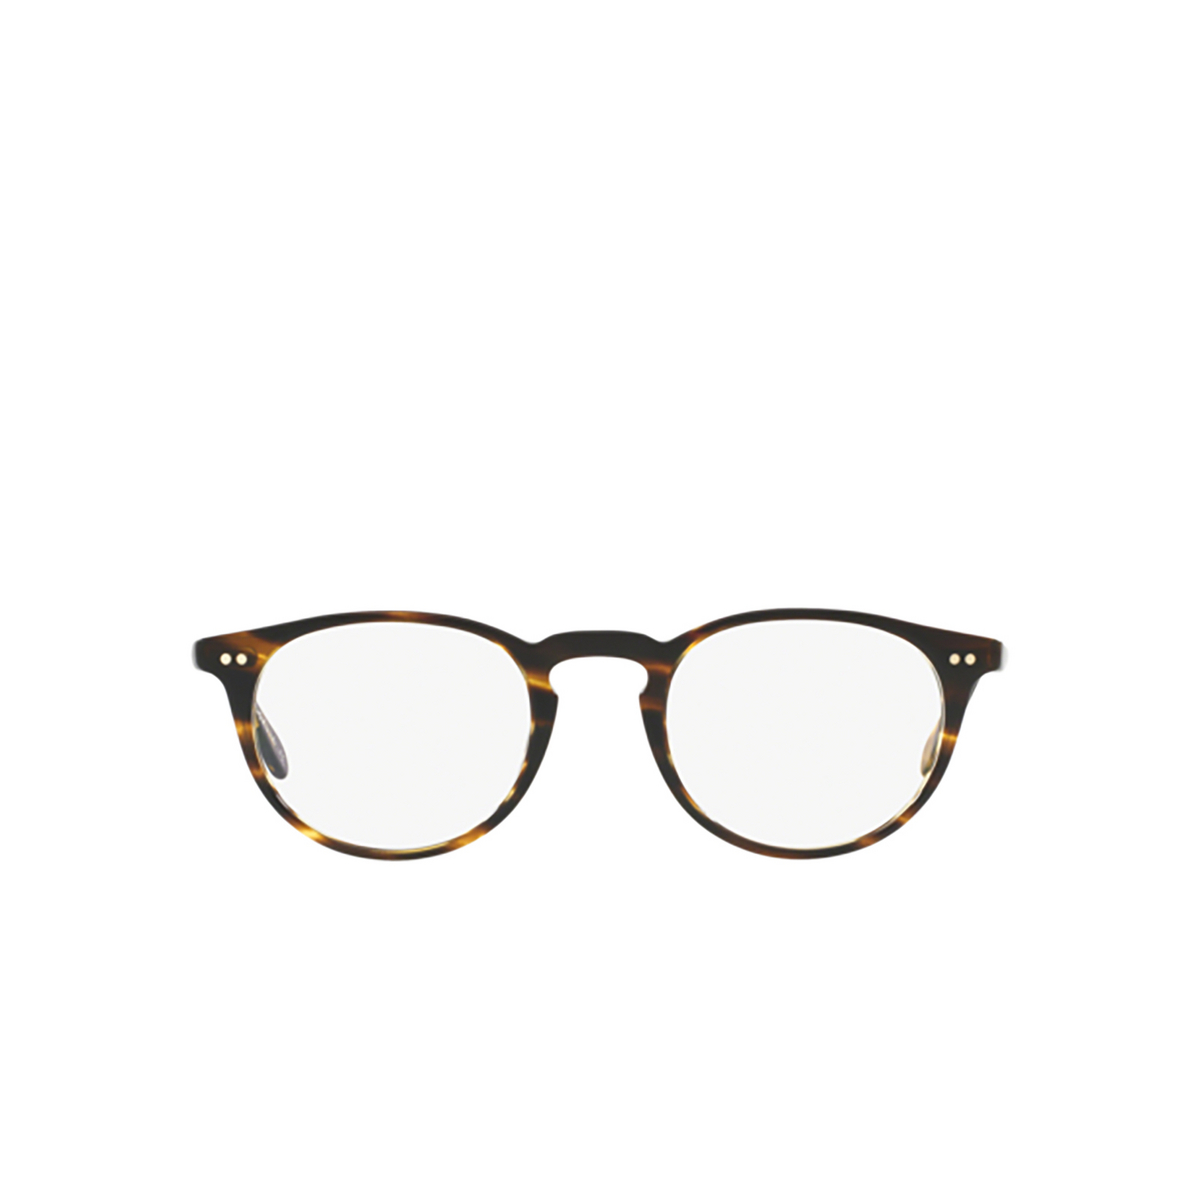 Oliver Peoples RILEY-R Eyeglasses 1003 Cocobolo (Coco) - front view